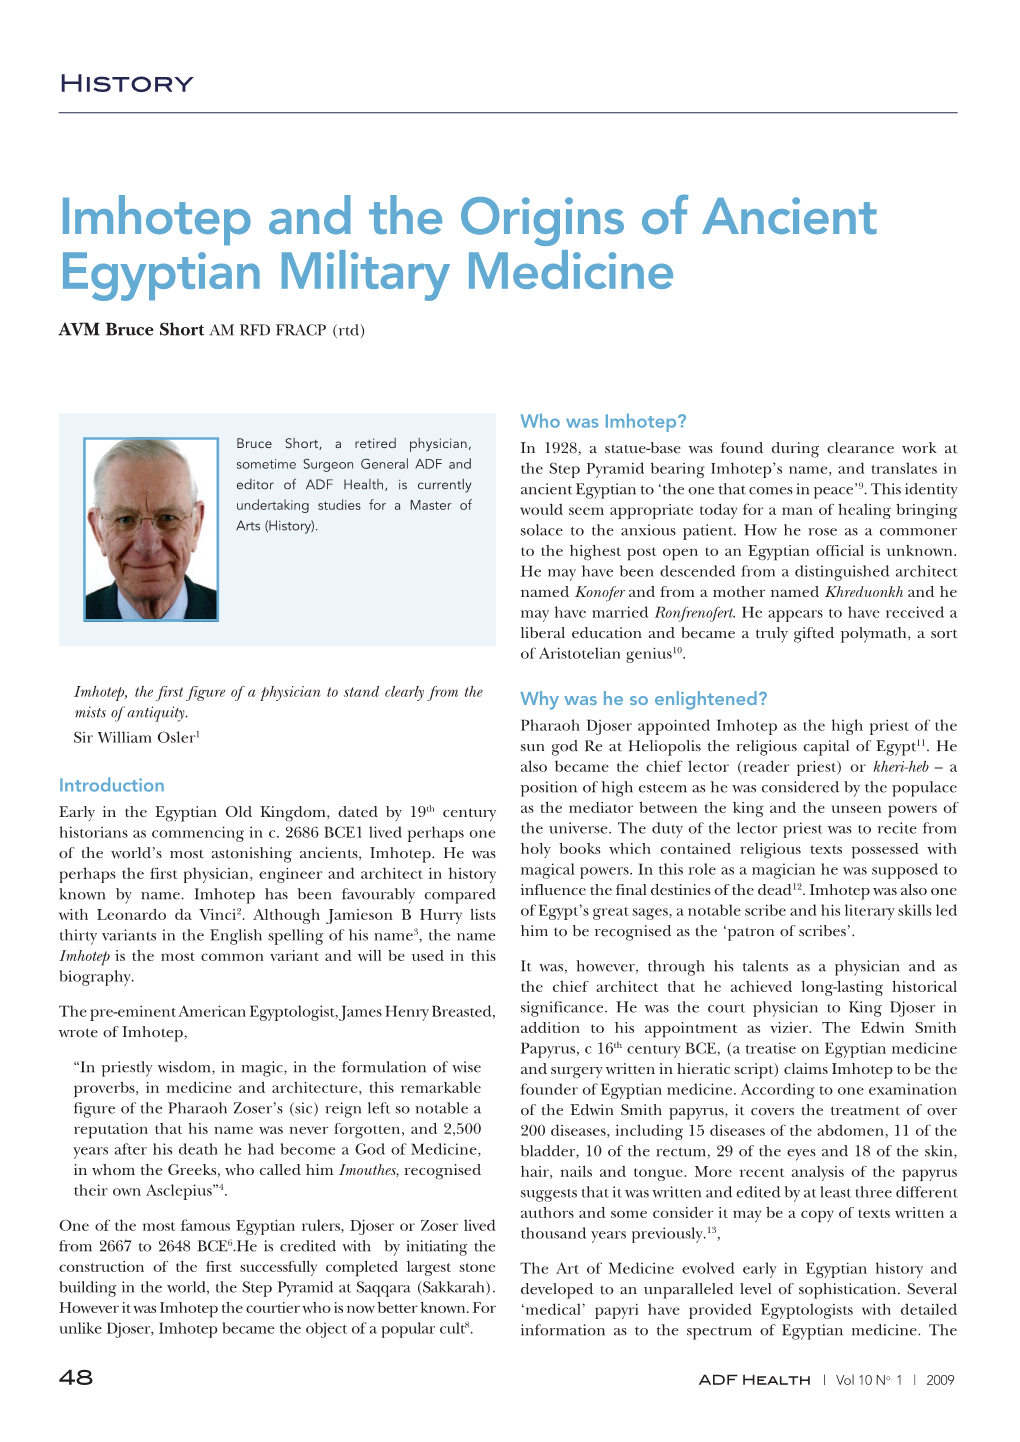 Imhotep and the Origins of Ancient Egyptian Military Medicine